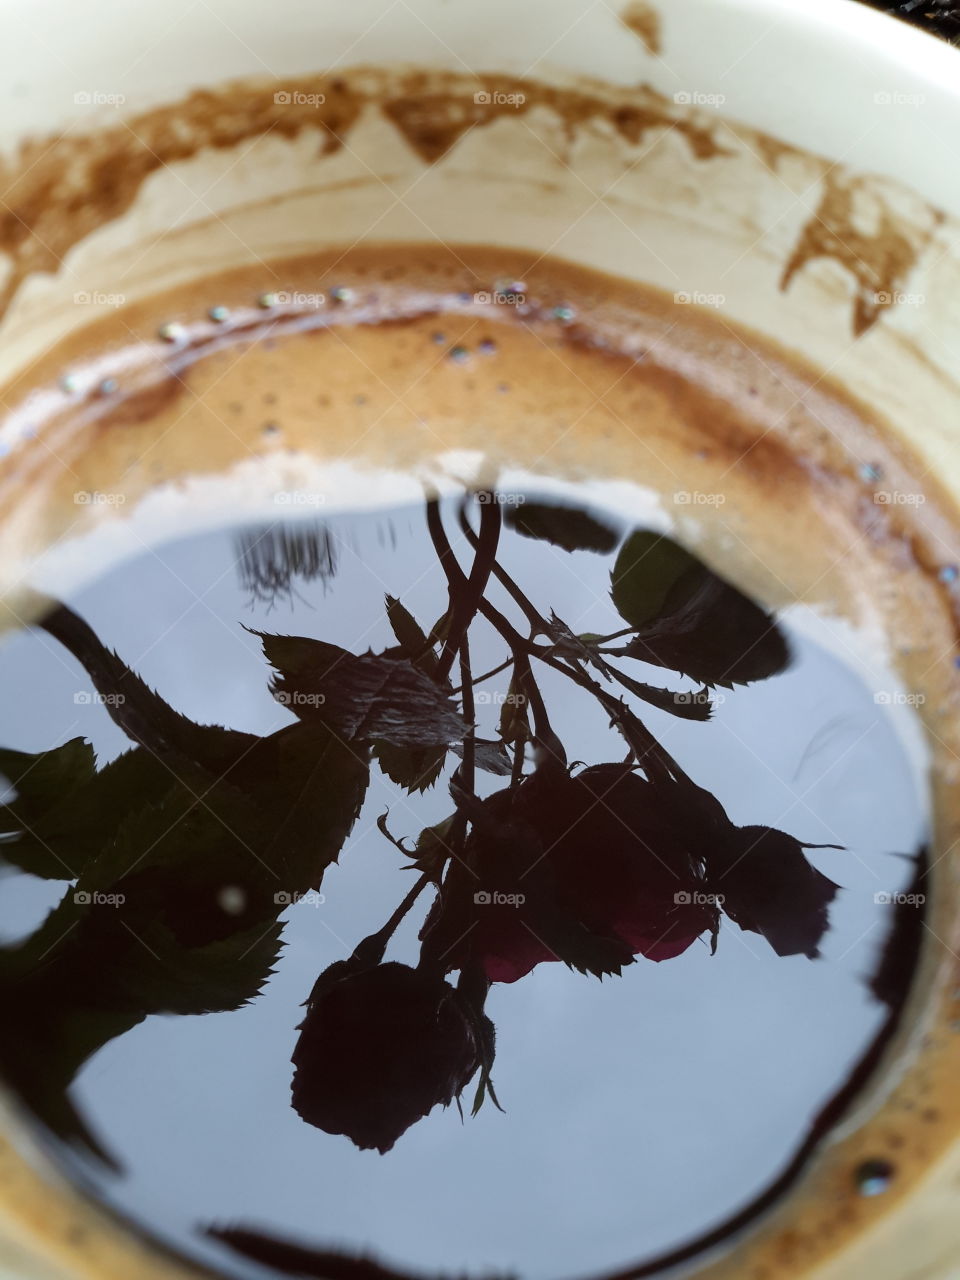 Roses in the coffe